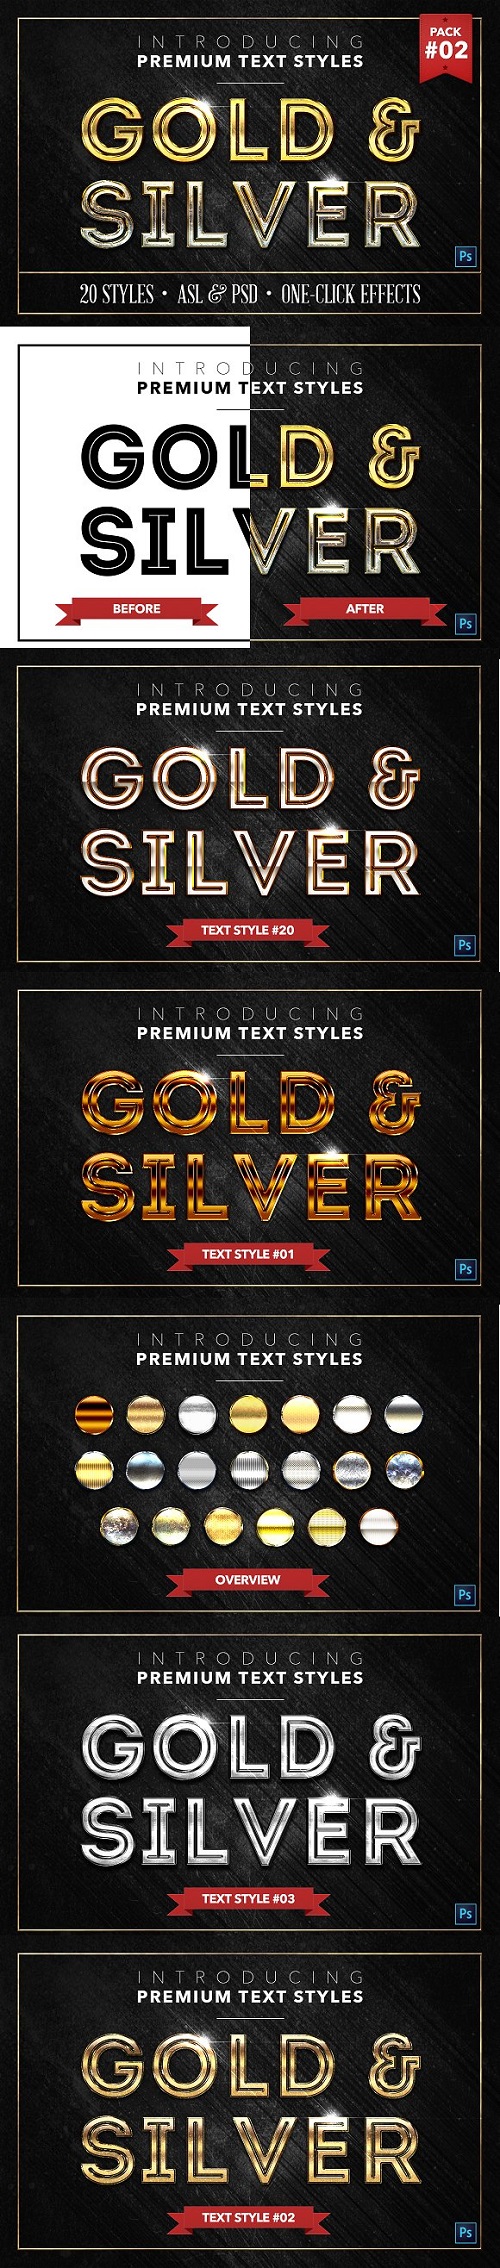 Gold & Silver #2 - 20 Text Styles - 1278366